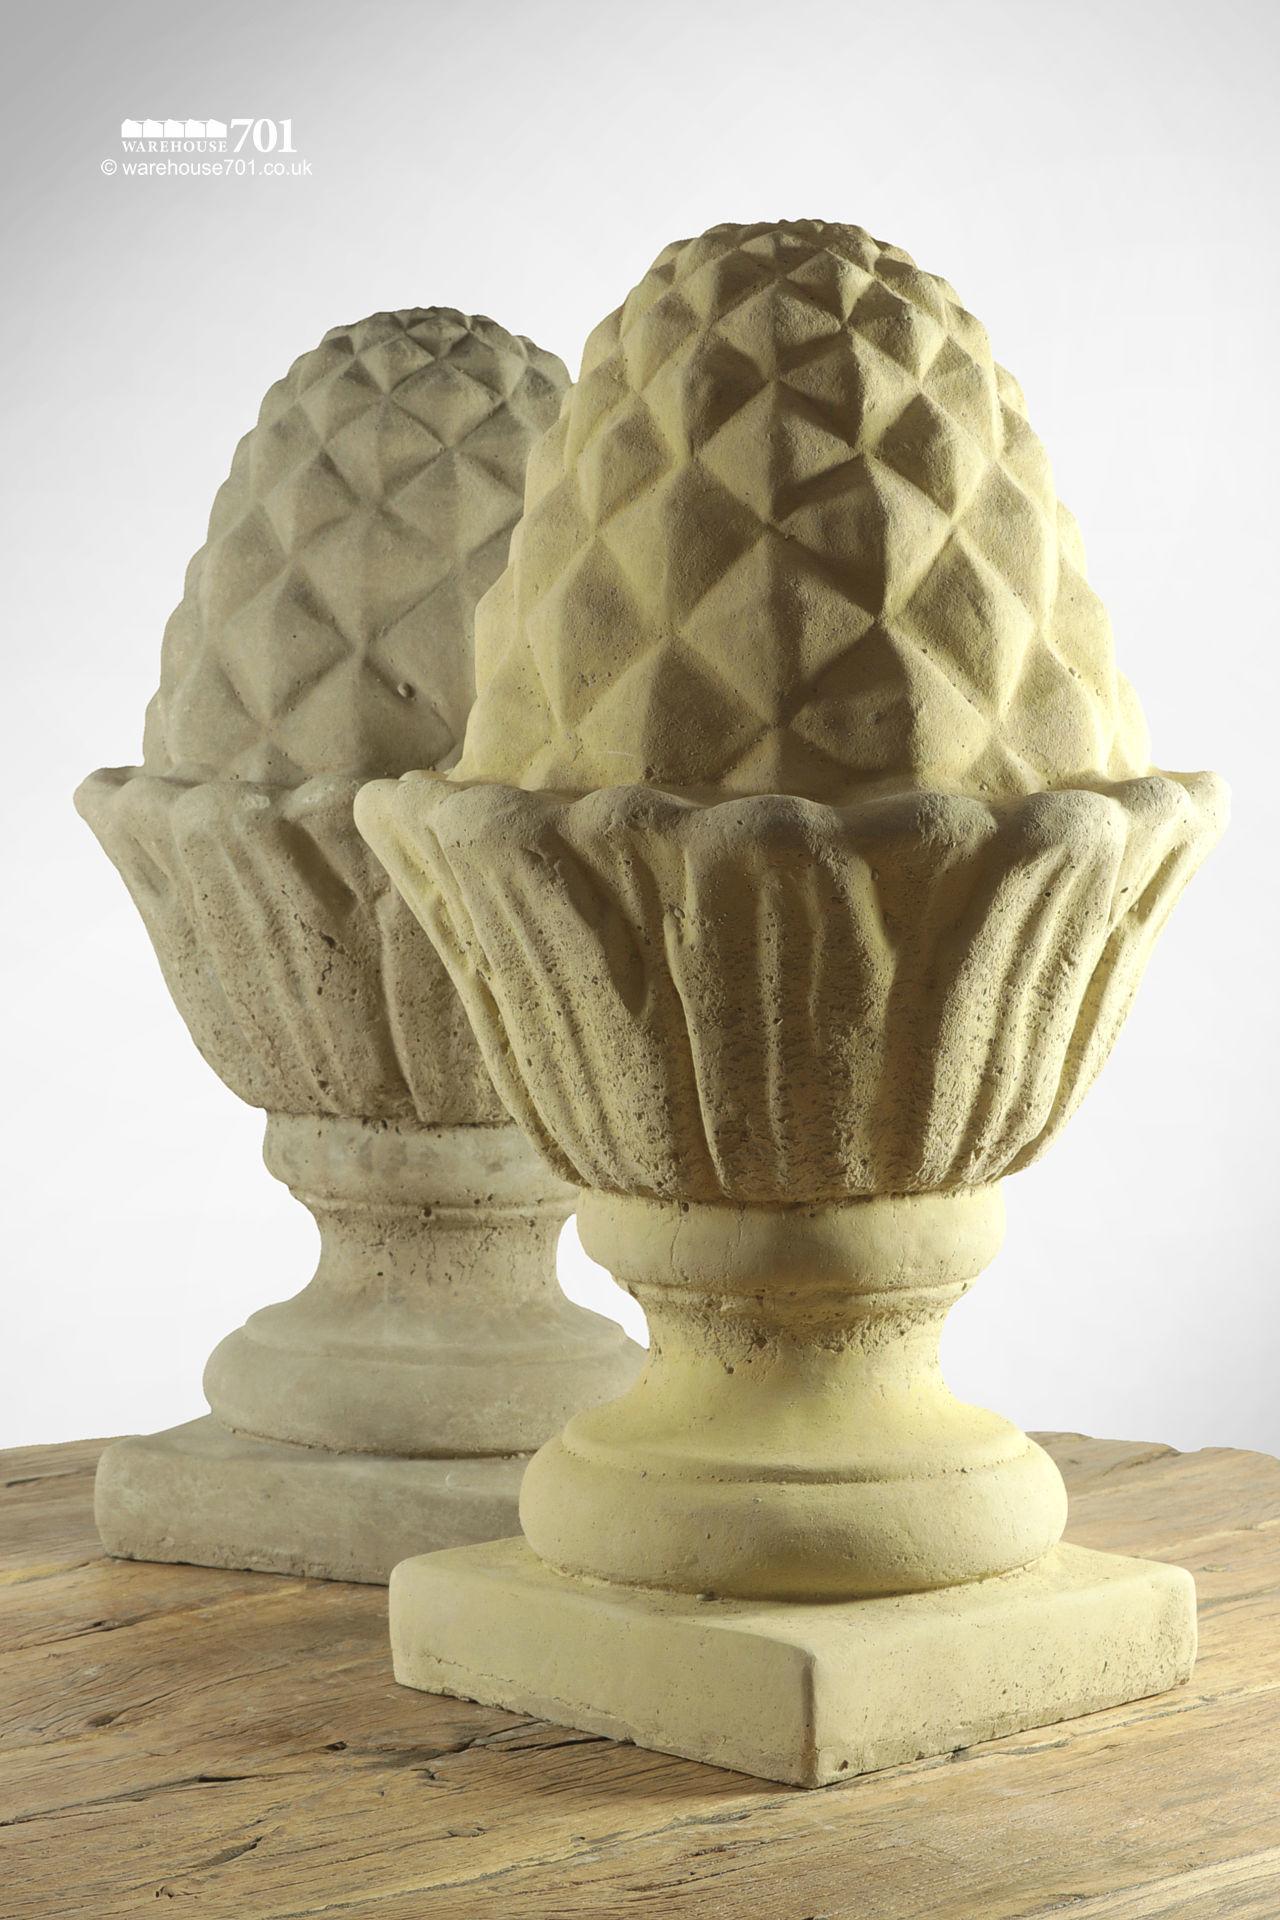 NEW Pair of Composite Stone Pineapple Finials or Garden Ornaments